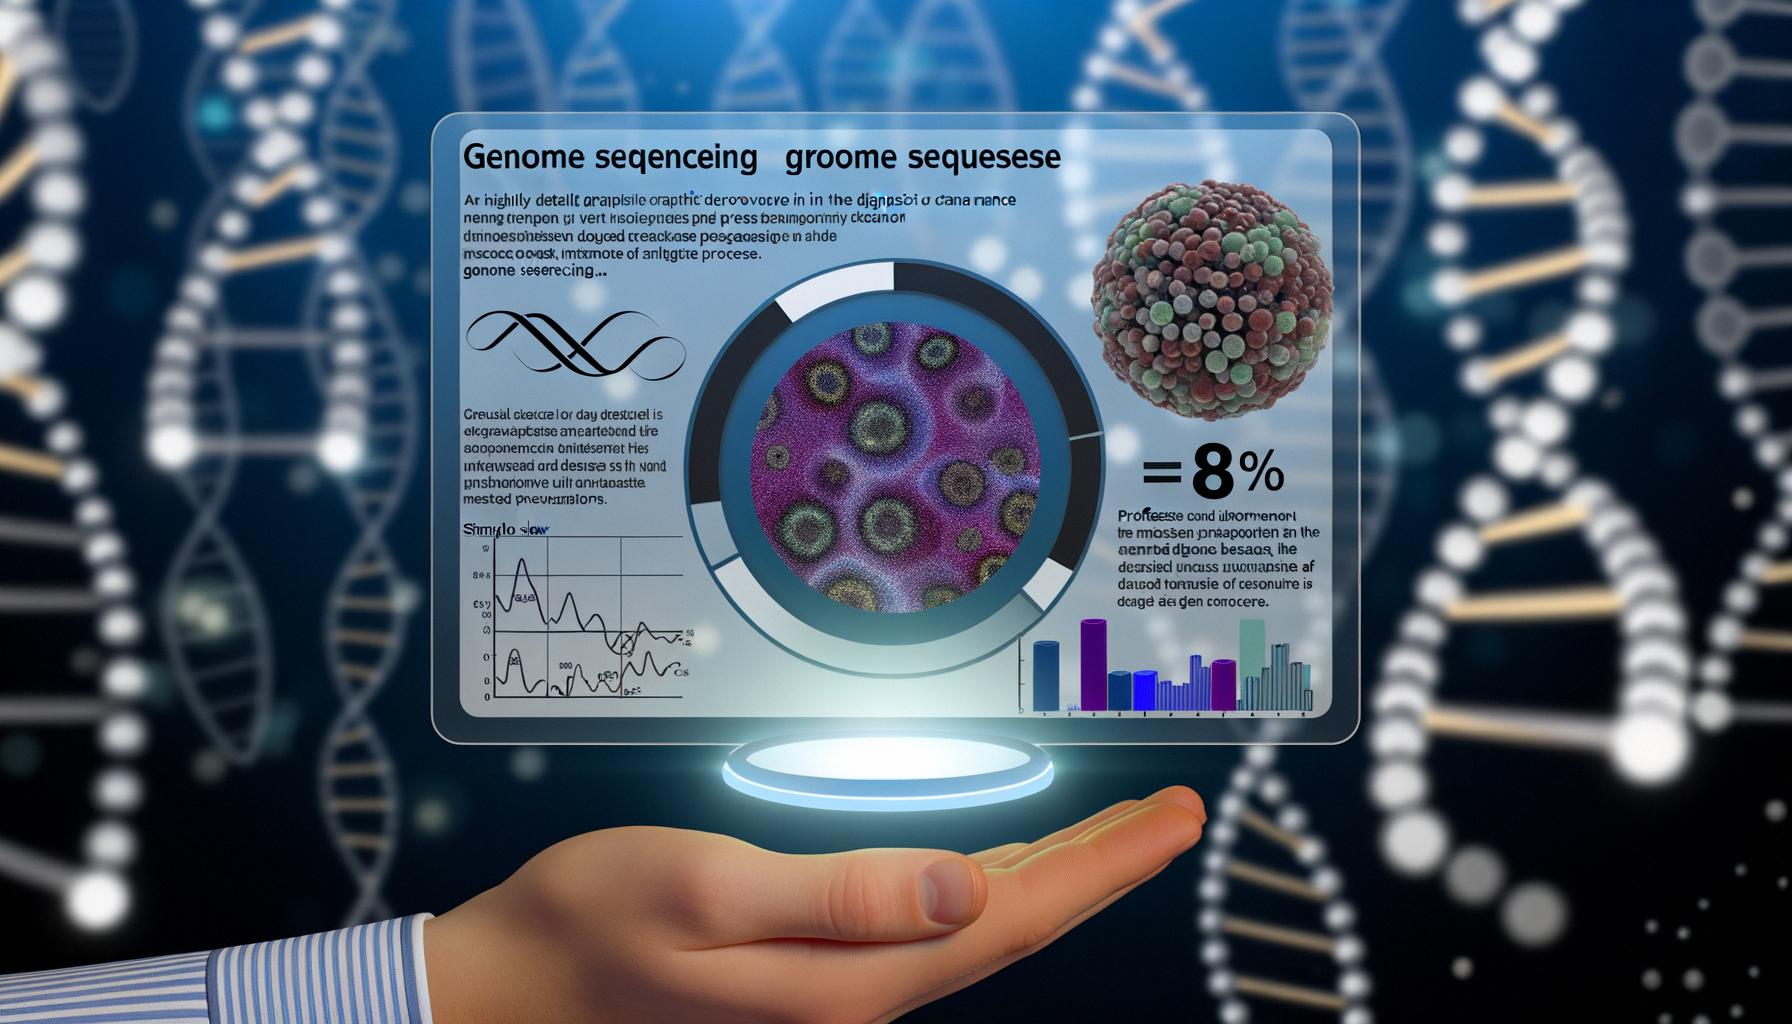 Genome sequencing significantly improves diagnostic rates for rare diseases over traditional tests.